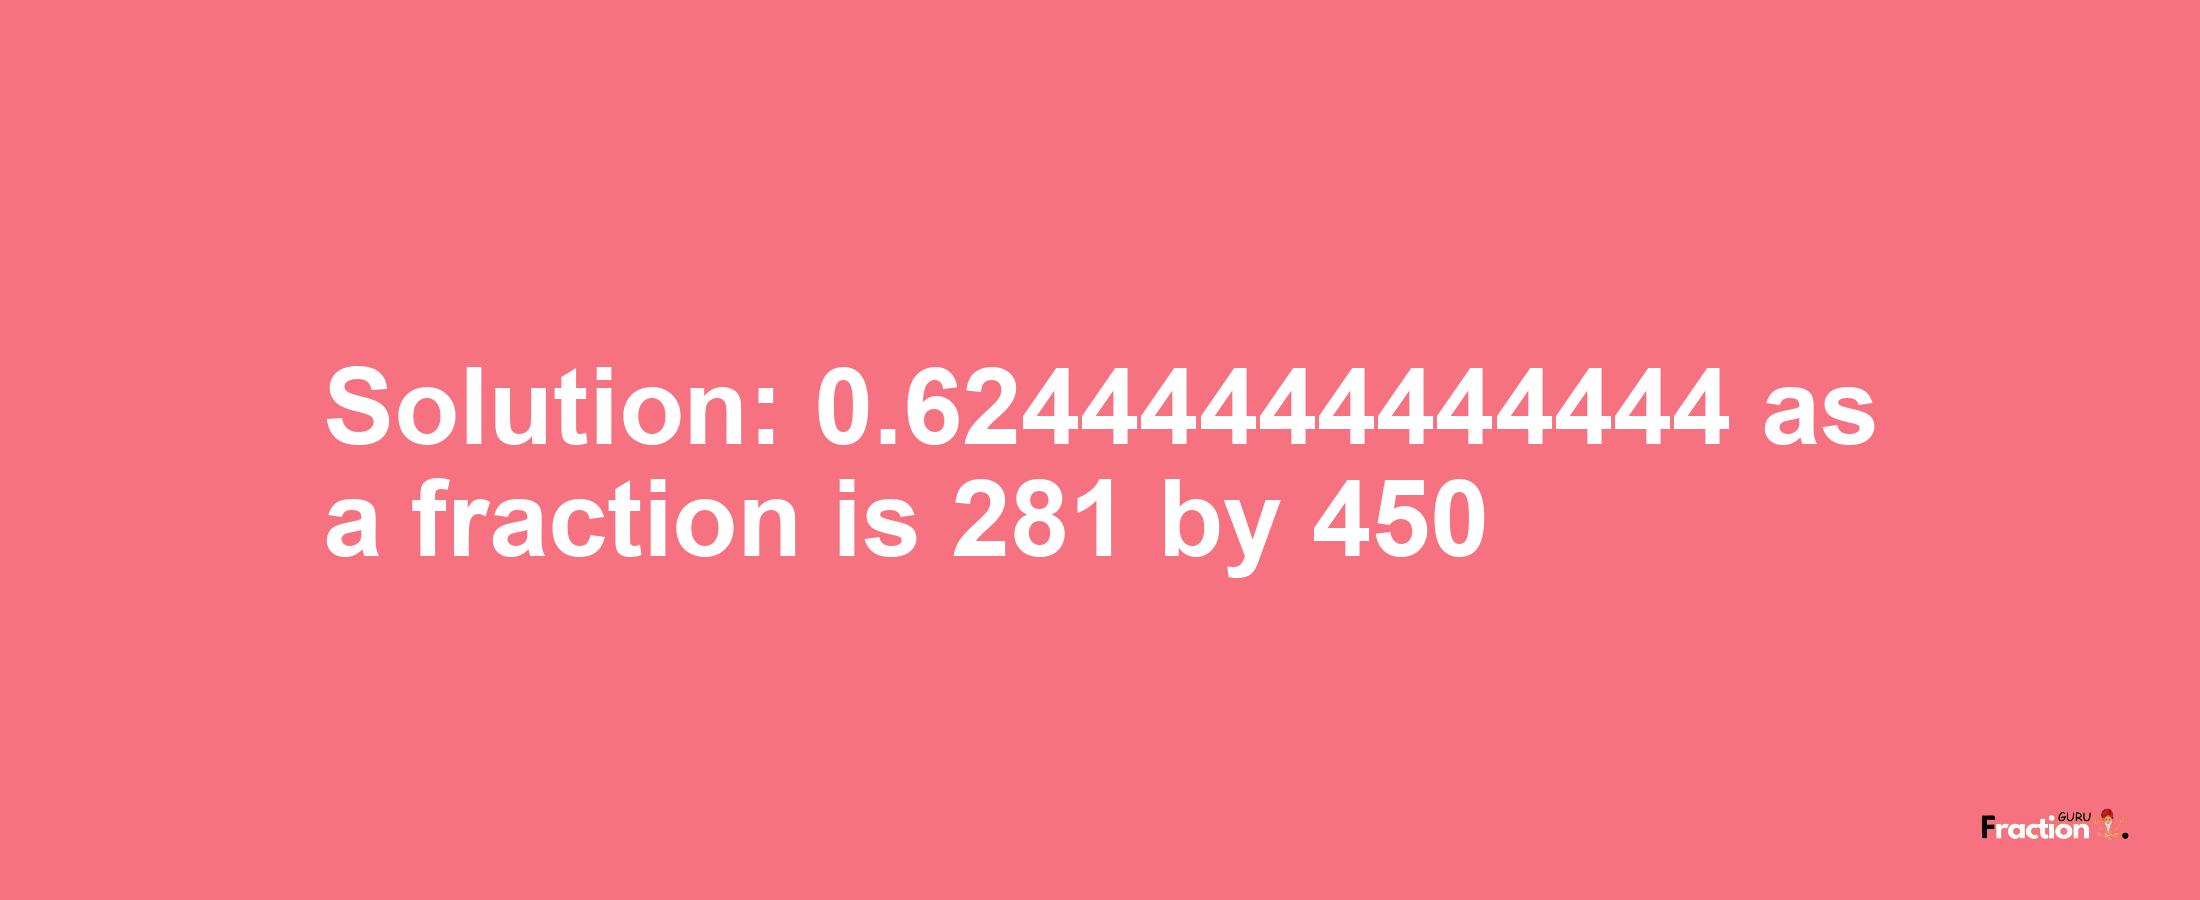 Solution:0.62444444444444 as a fraction is 281/450